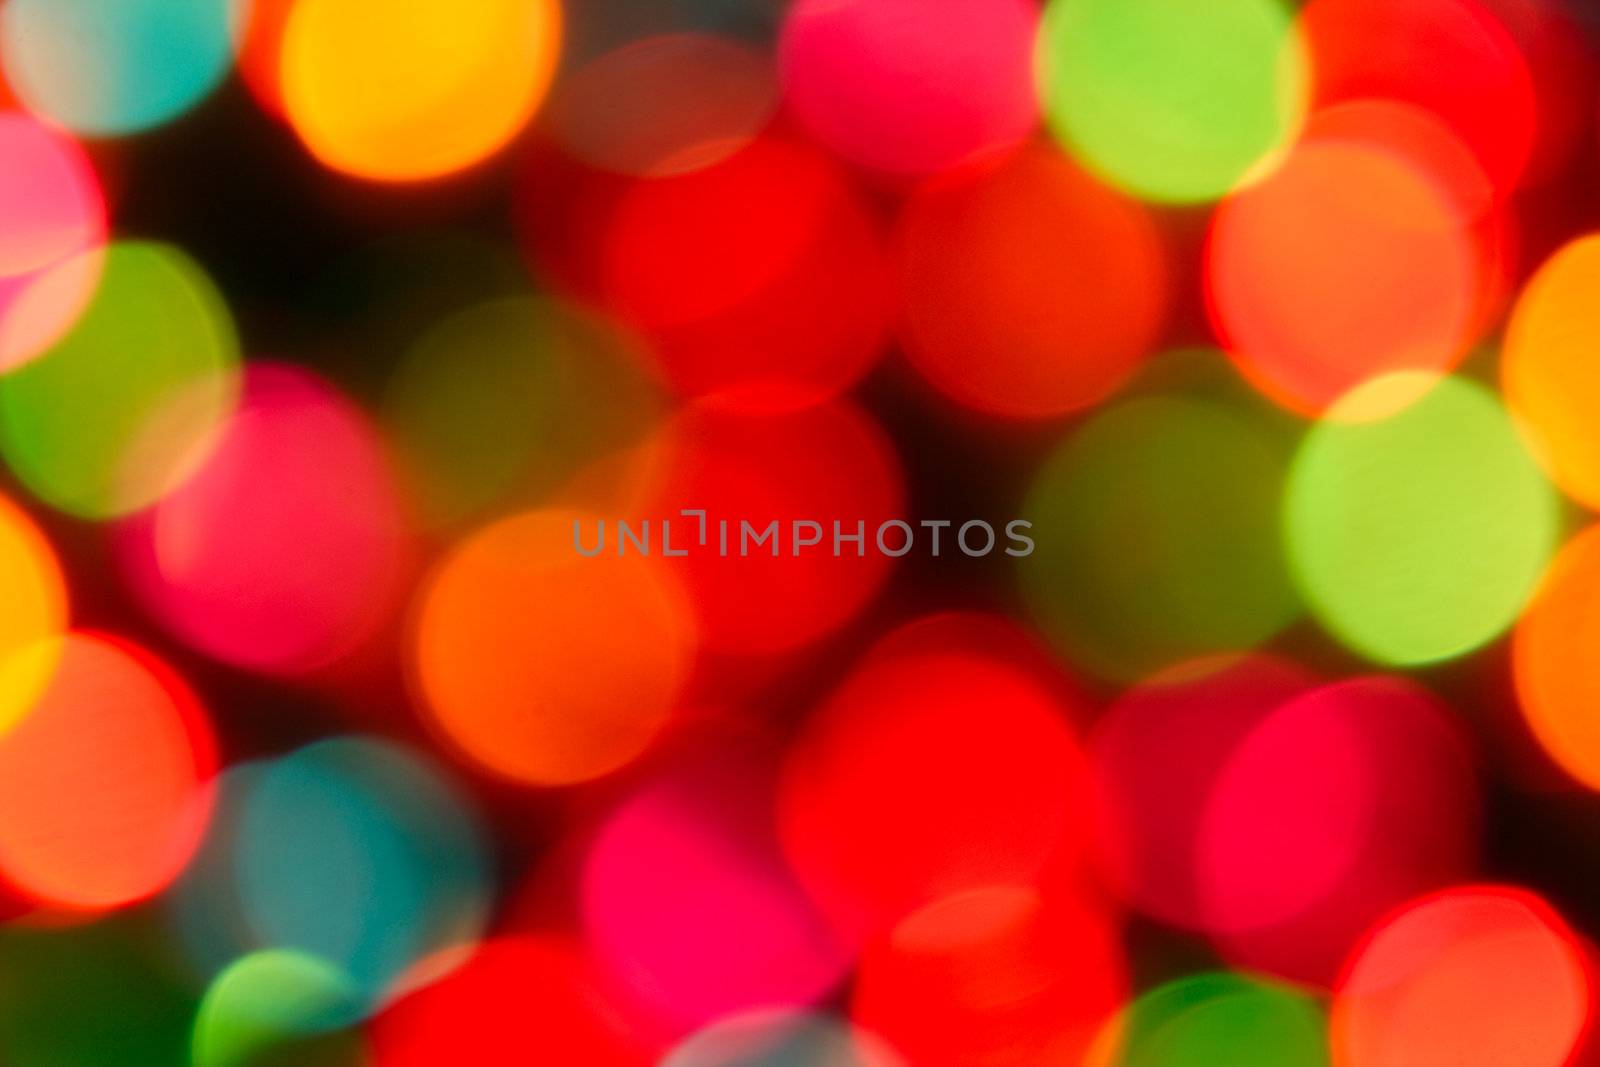 Blur Abstract by aguirre_mar